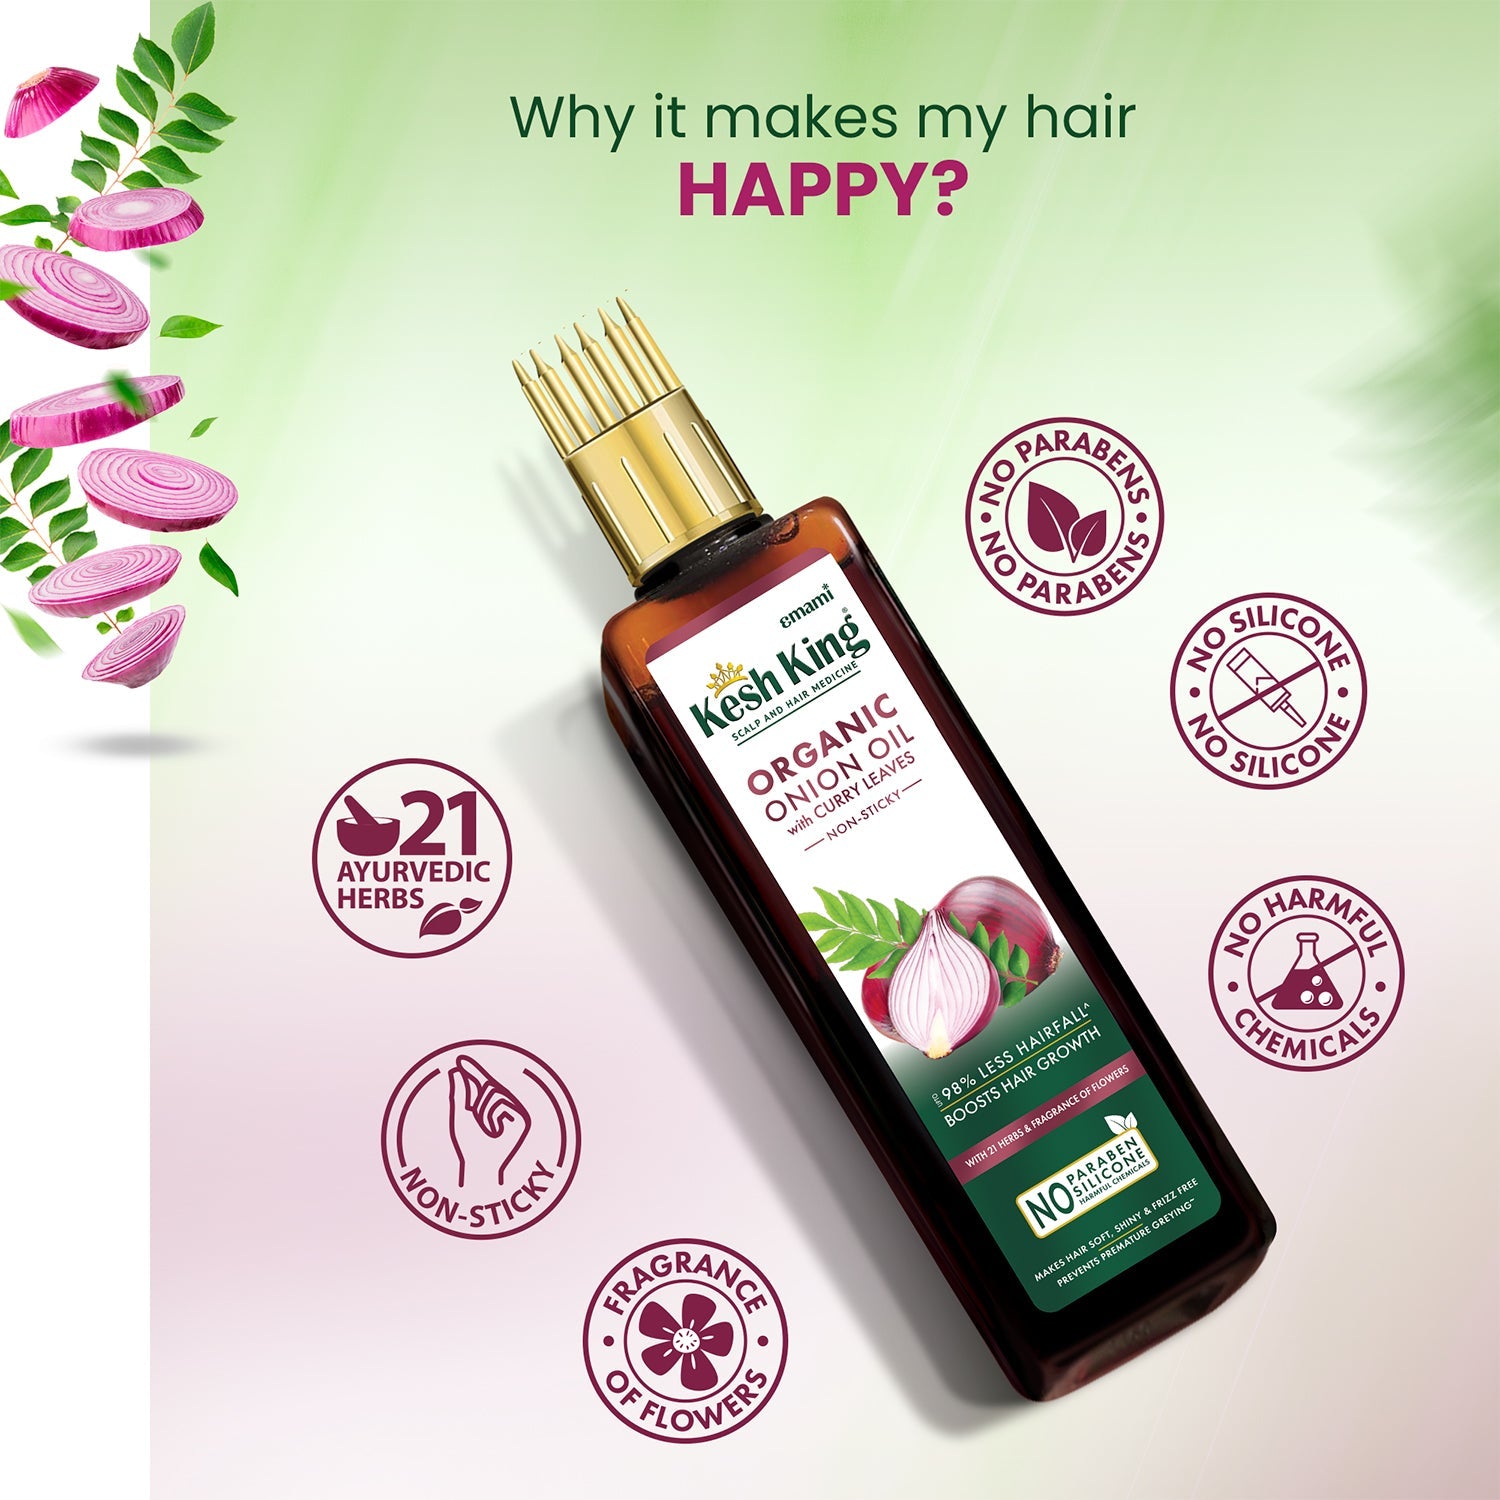 Kesh King Organic Onion Oil With Curry Leaves Reduces Hair Fall Upto 98% and Boosts Hair Growth | Non-Sticky Formula | Fragrance of Flowers | Goodness of Onion, Curry Leaves, Amla &amp; Bhringraj - 200ml